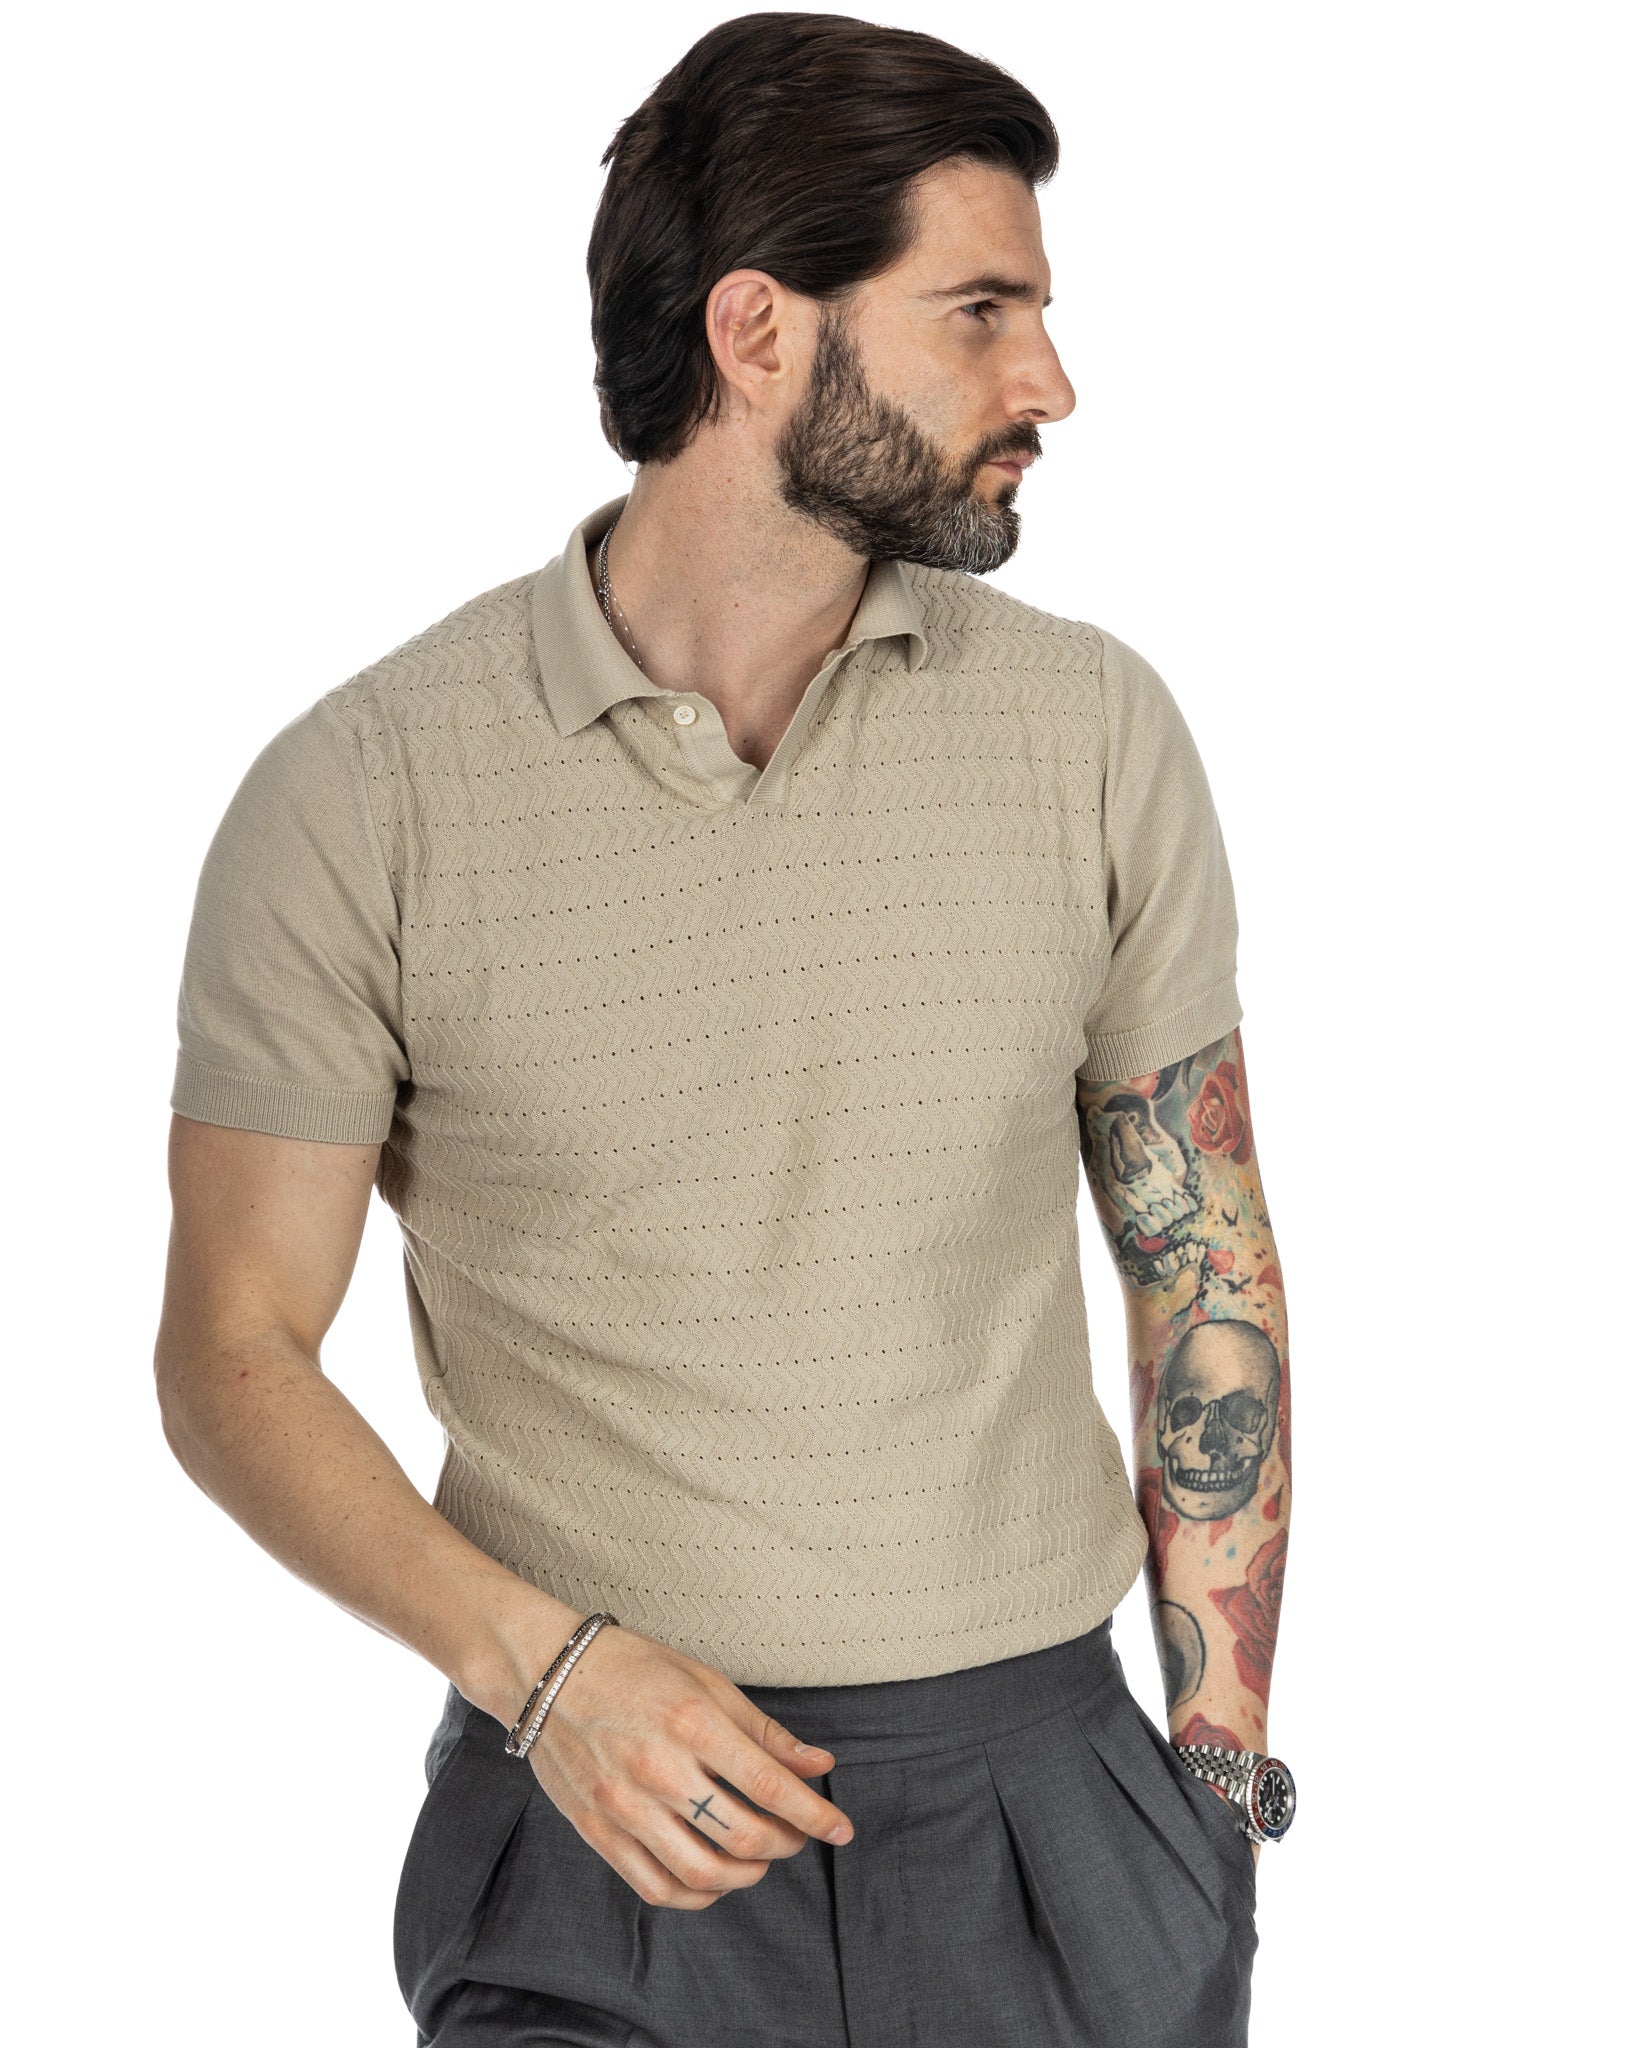 Stefanos - beige jacquard knitted polo shirt